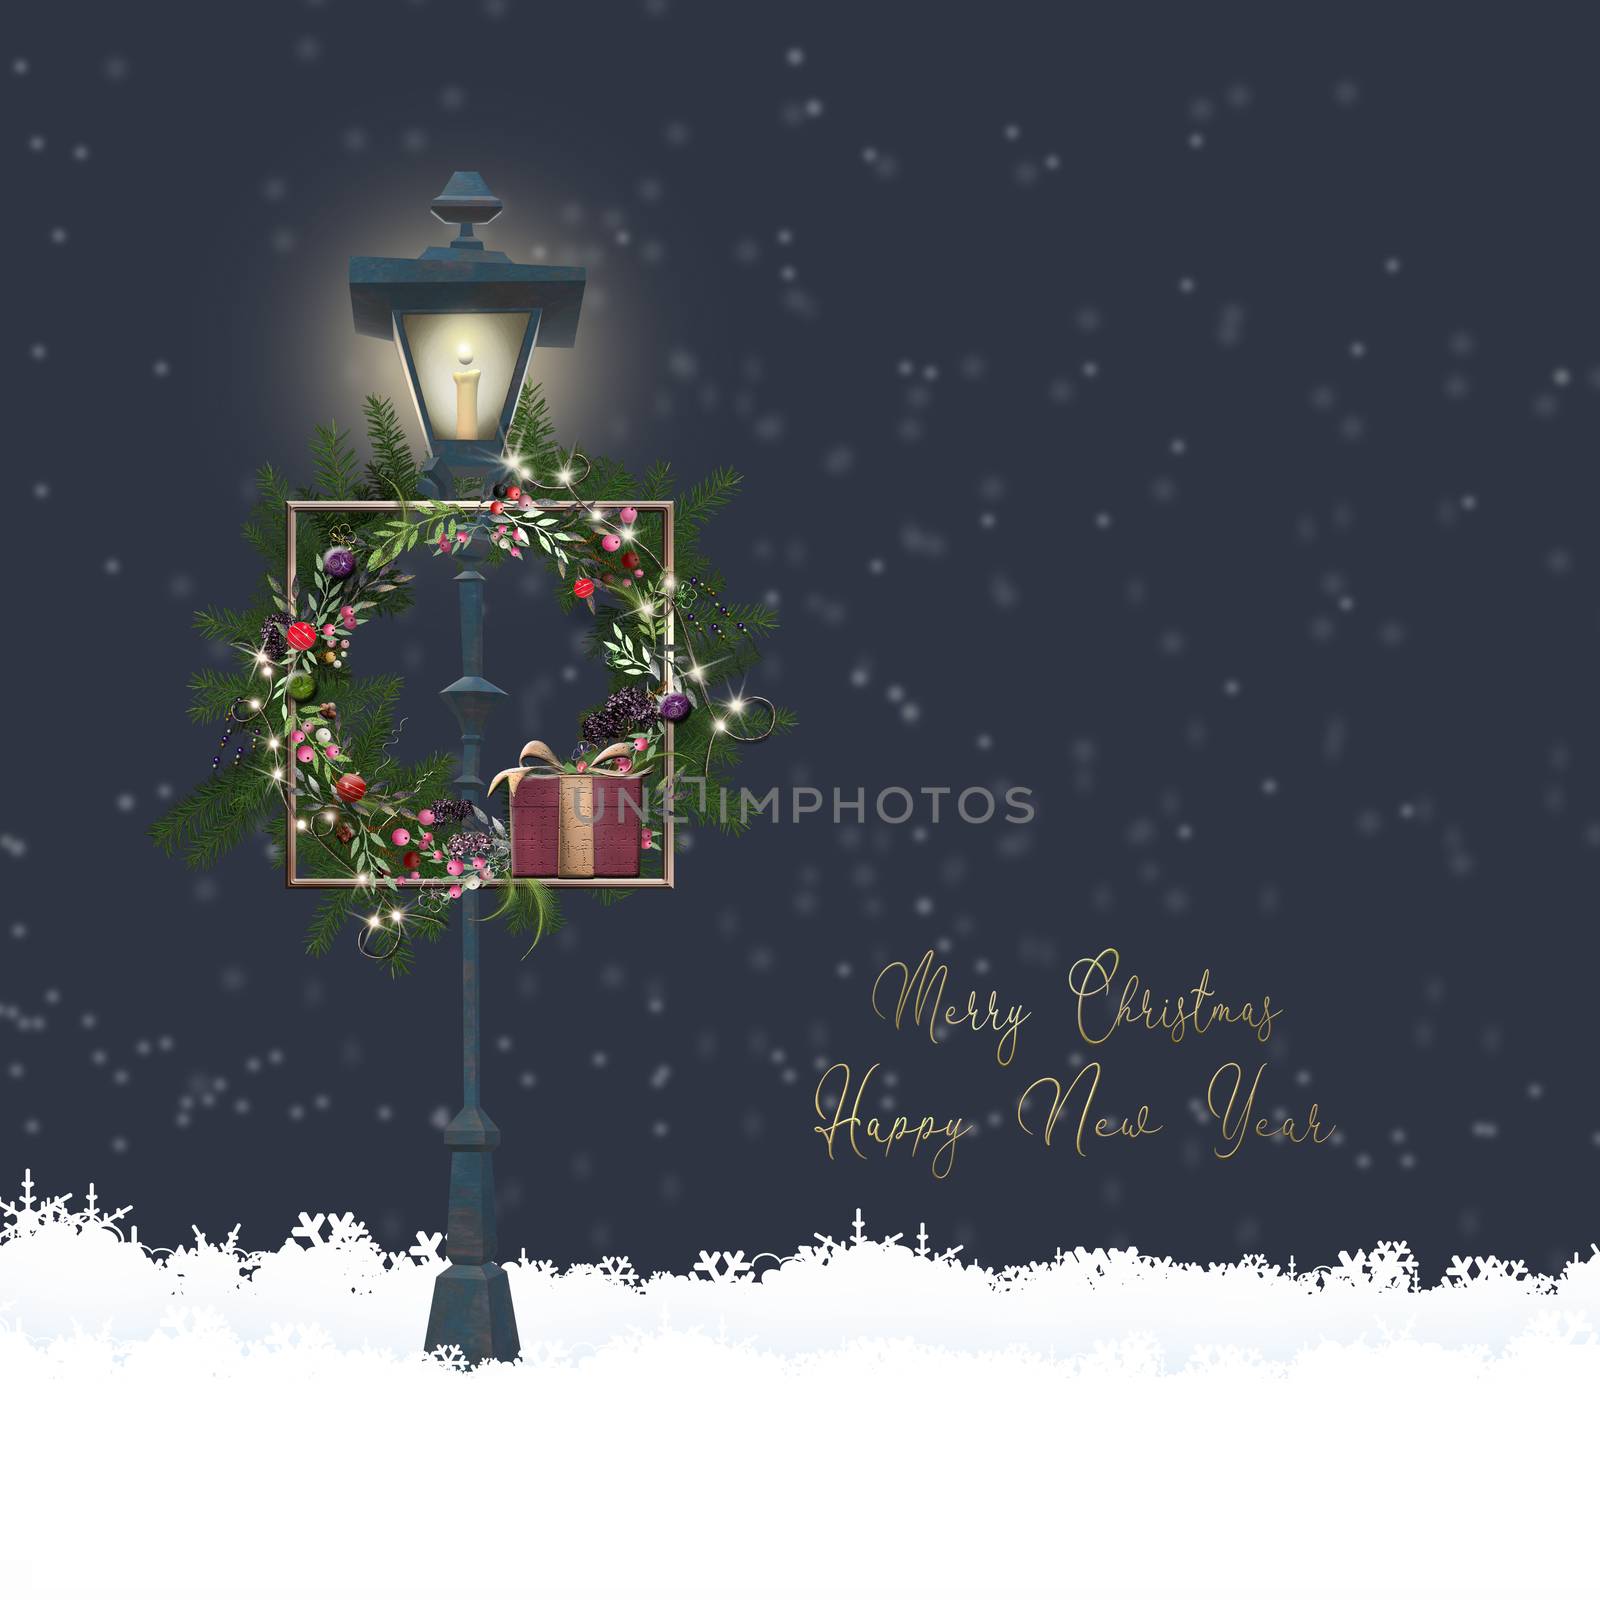 Christmas New Year magic night background Christmas floral wreath on street light on dark blue background with snow. Gold text Merry Christmas Happy New year. Place for text, 3D Illustration.